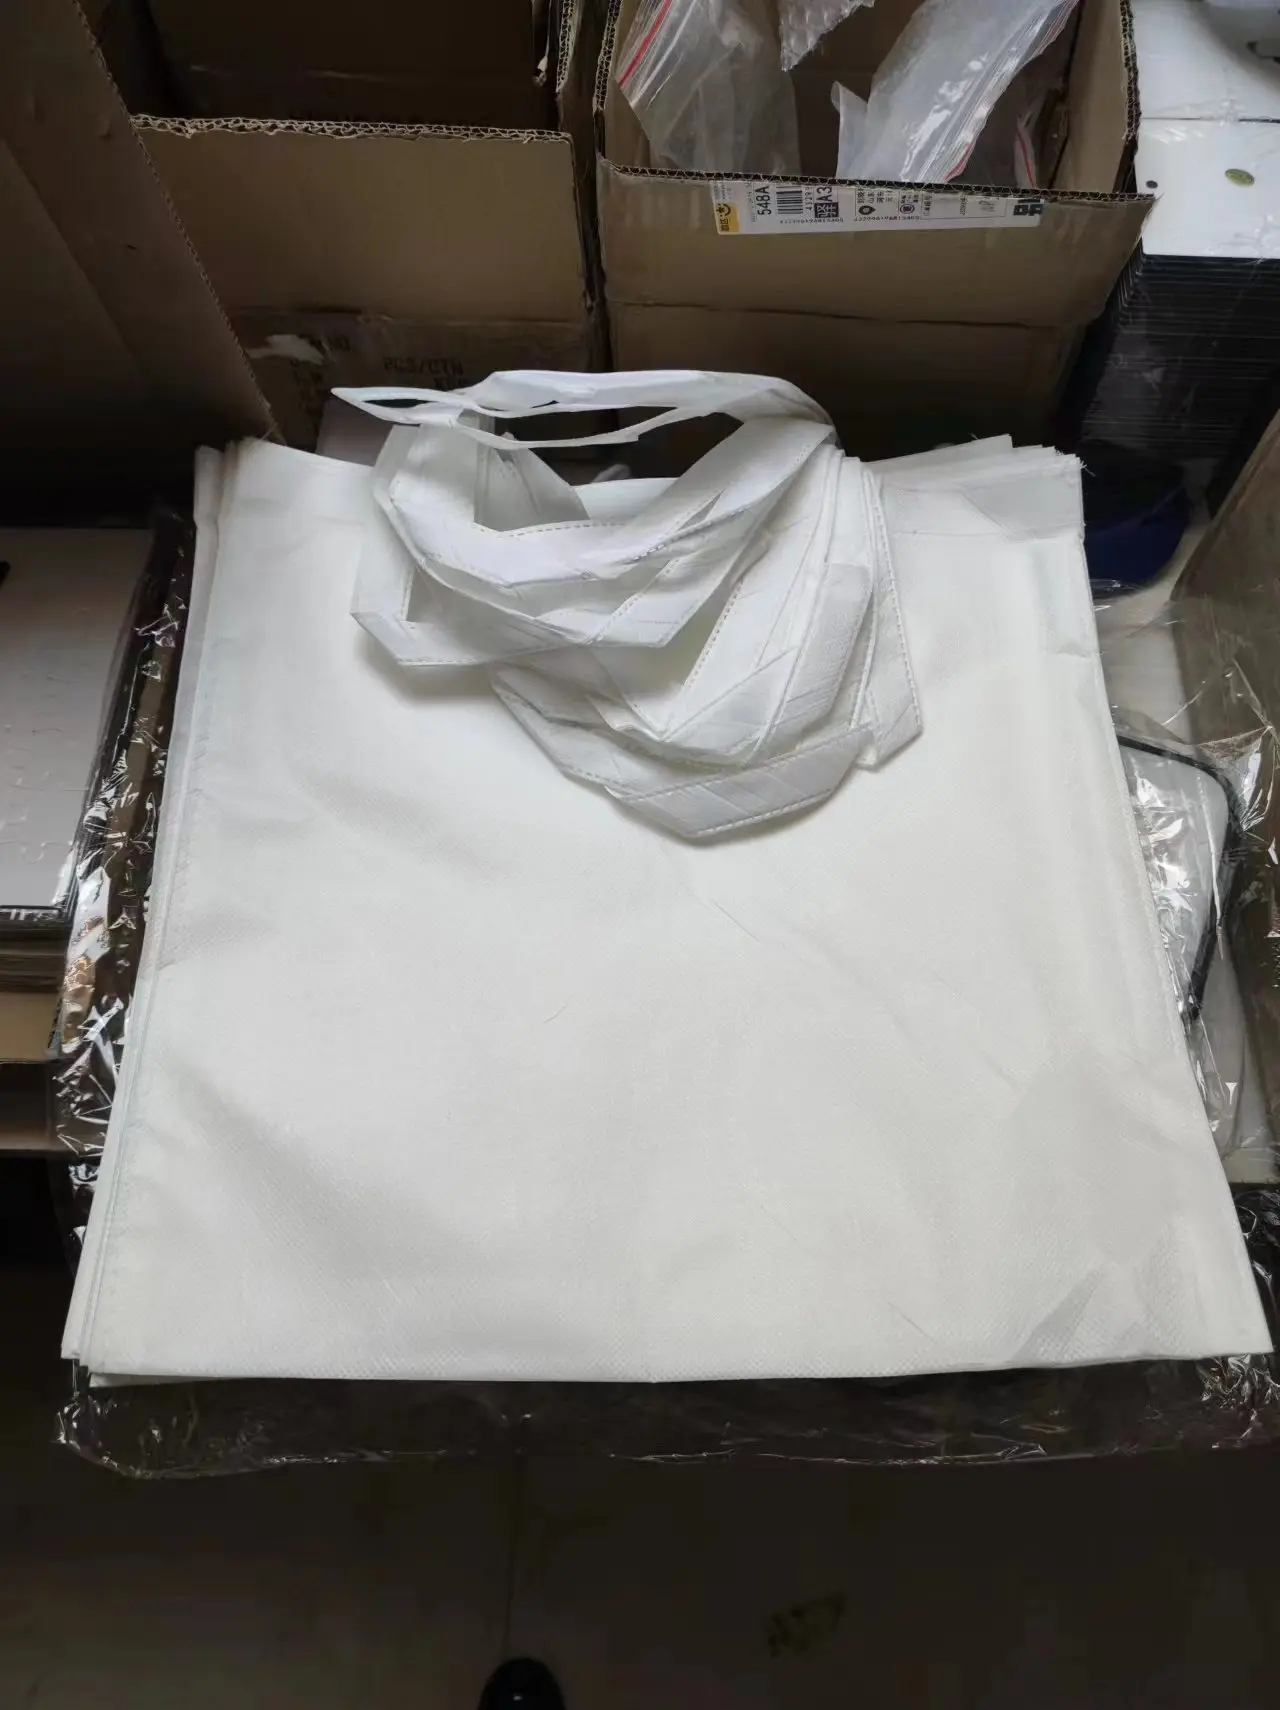 Free Shipping 20pcs/lot  Blank Non-woven Fabrics Bags Packet For Sublimation Printing by Flat Heat Press DIY 38x40.6cm free shipping 100pcs 0 22mm thickness sublimation blank metal name card business card printing flat heat press